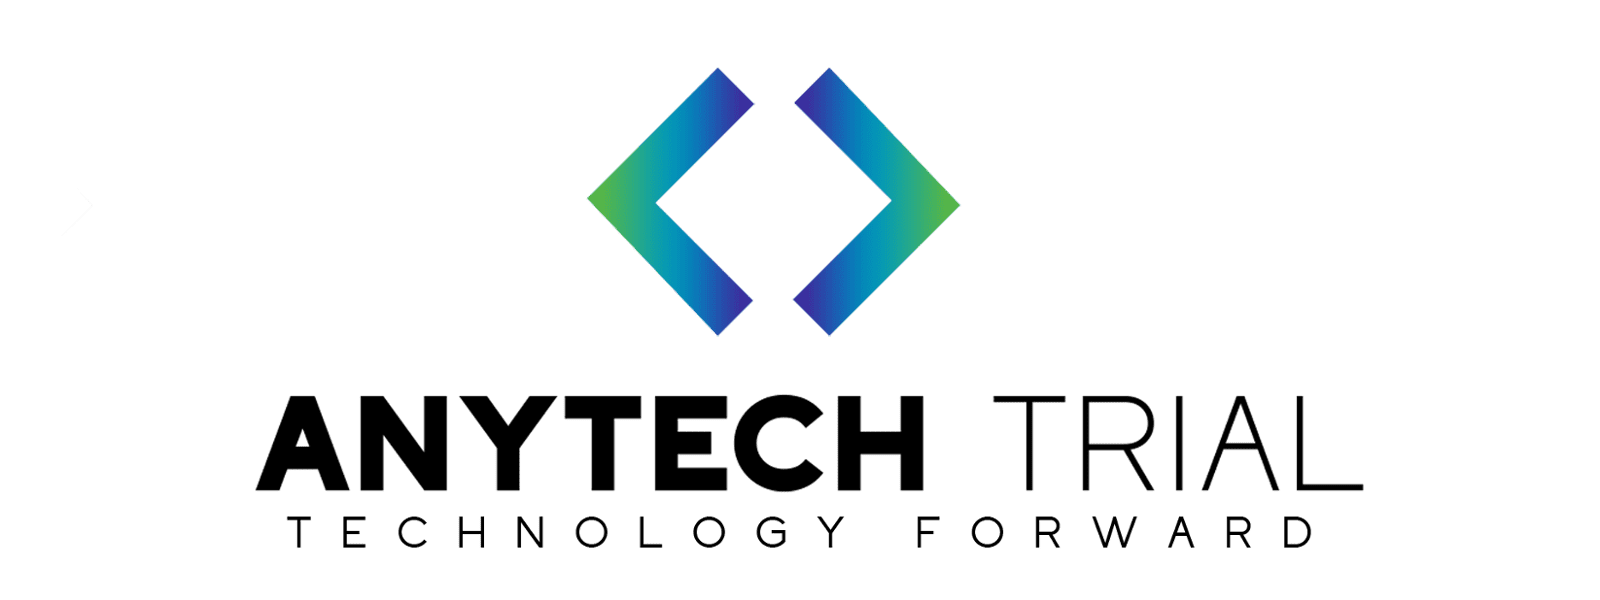 AnyTechTrial